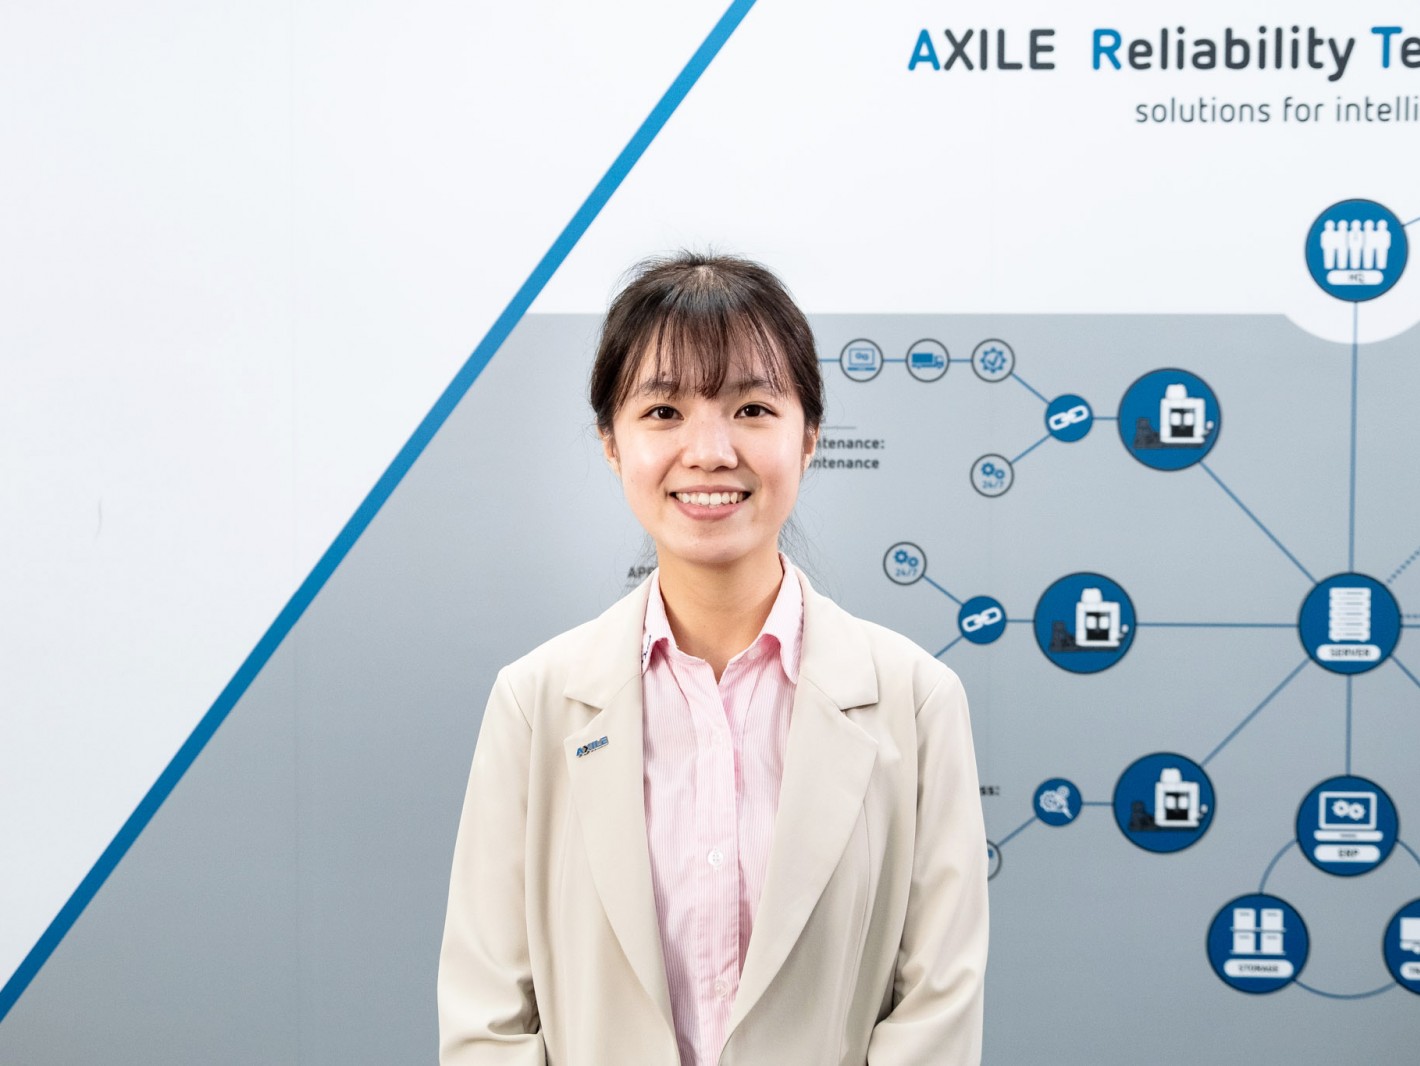 Ms. Erica Tsai, Sales Manager of AXILE, demonstrated “How to Embrace Smart Manufacturing Post COVID-19 to Increase Machining Efficiency and Resilience”.